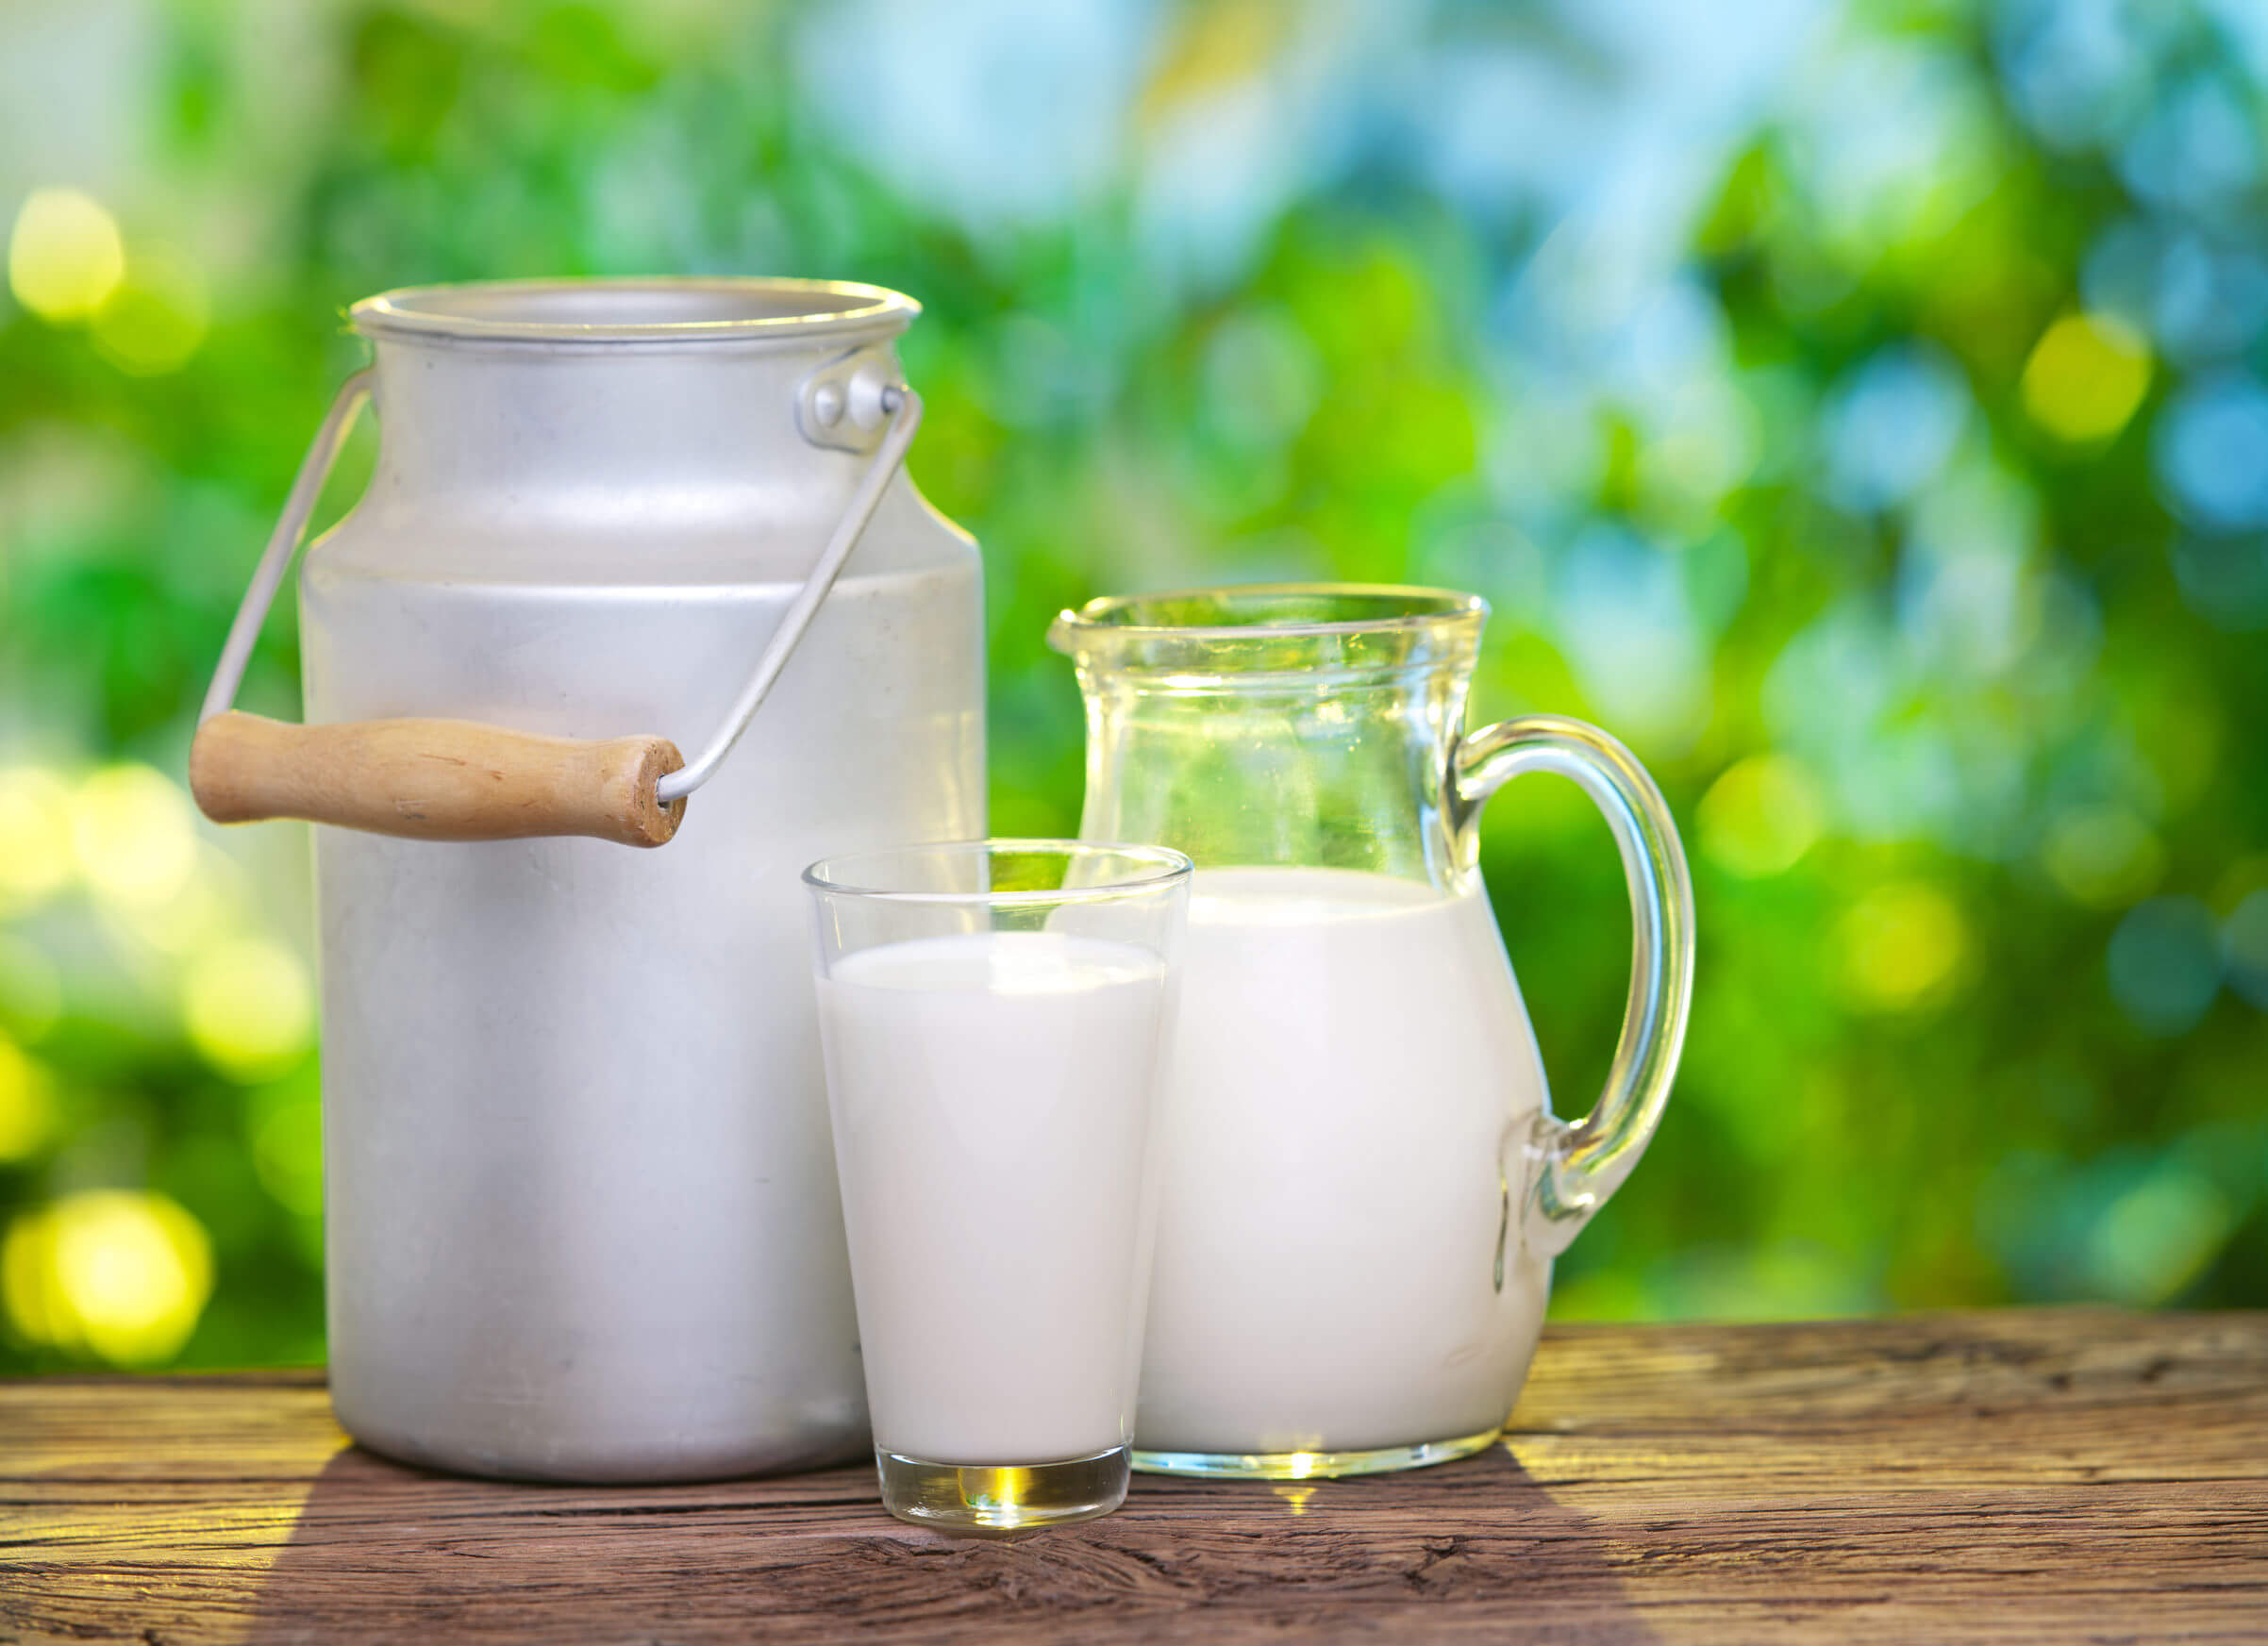 Good fats are present in dairy.